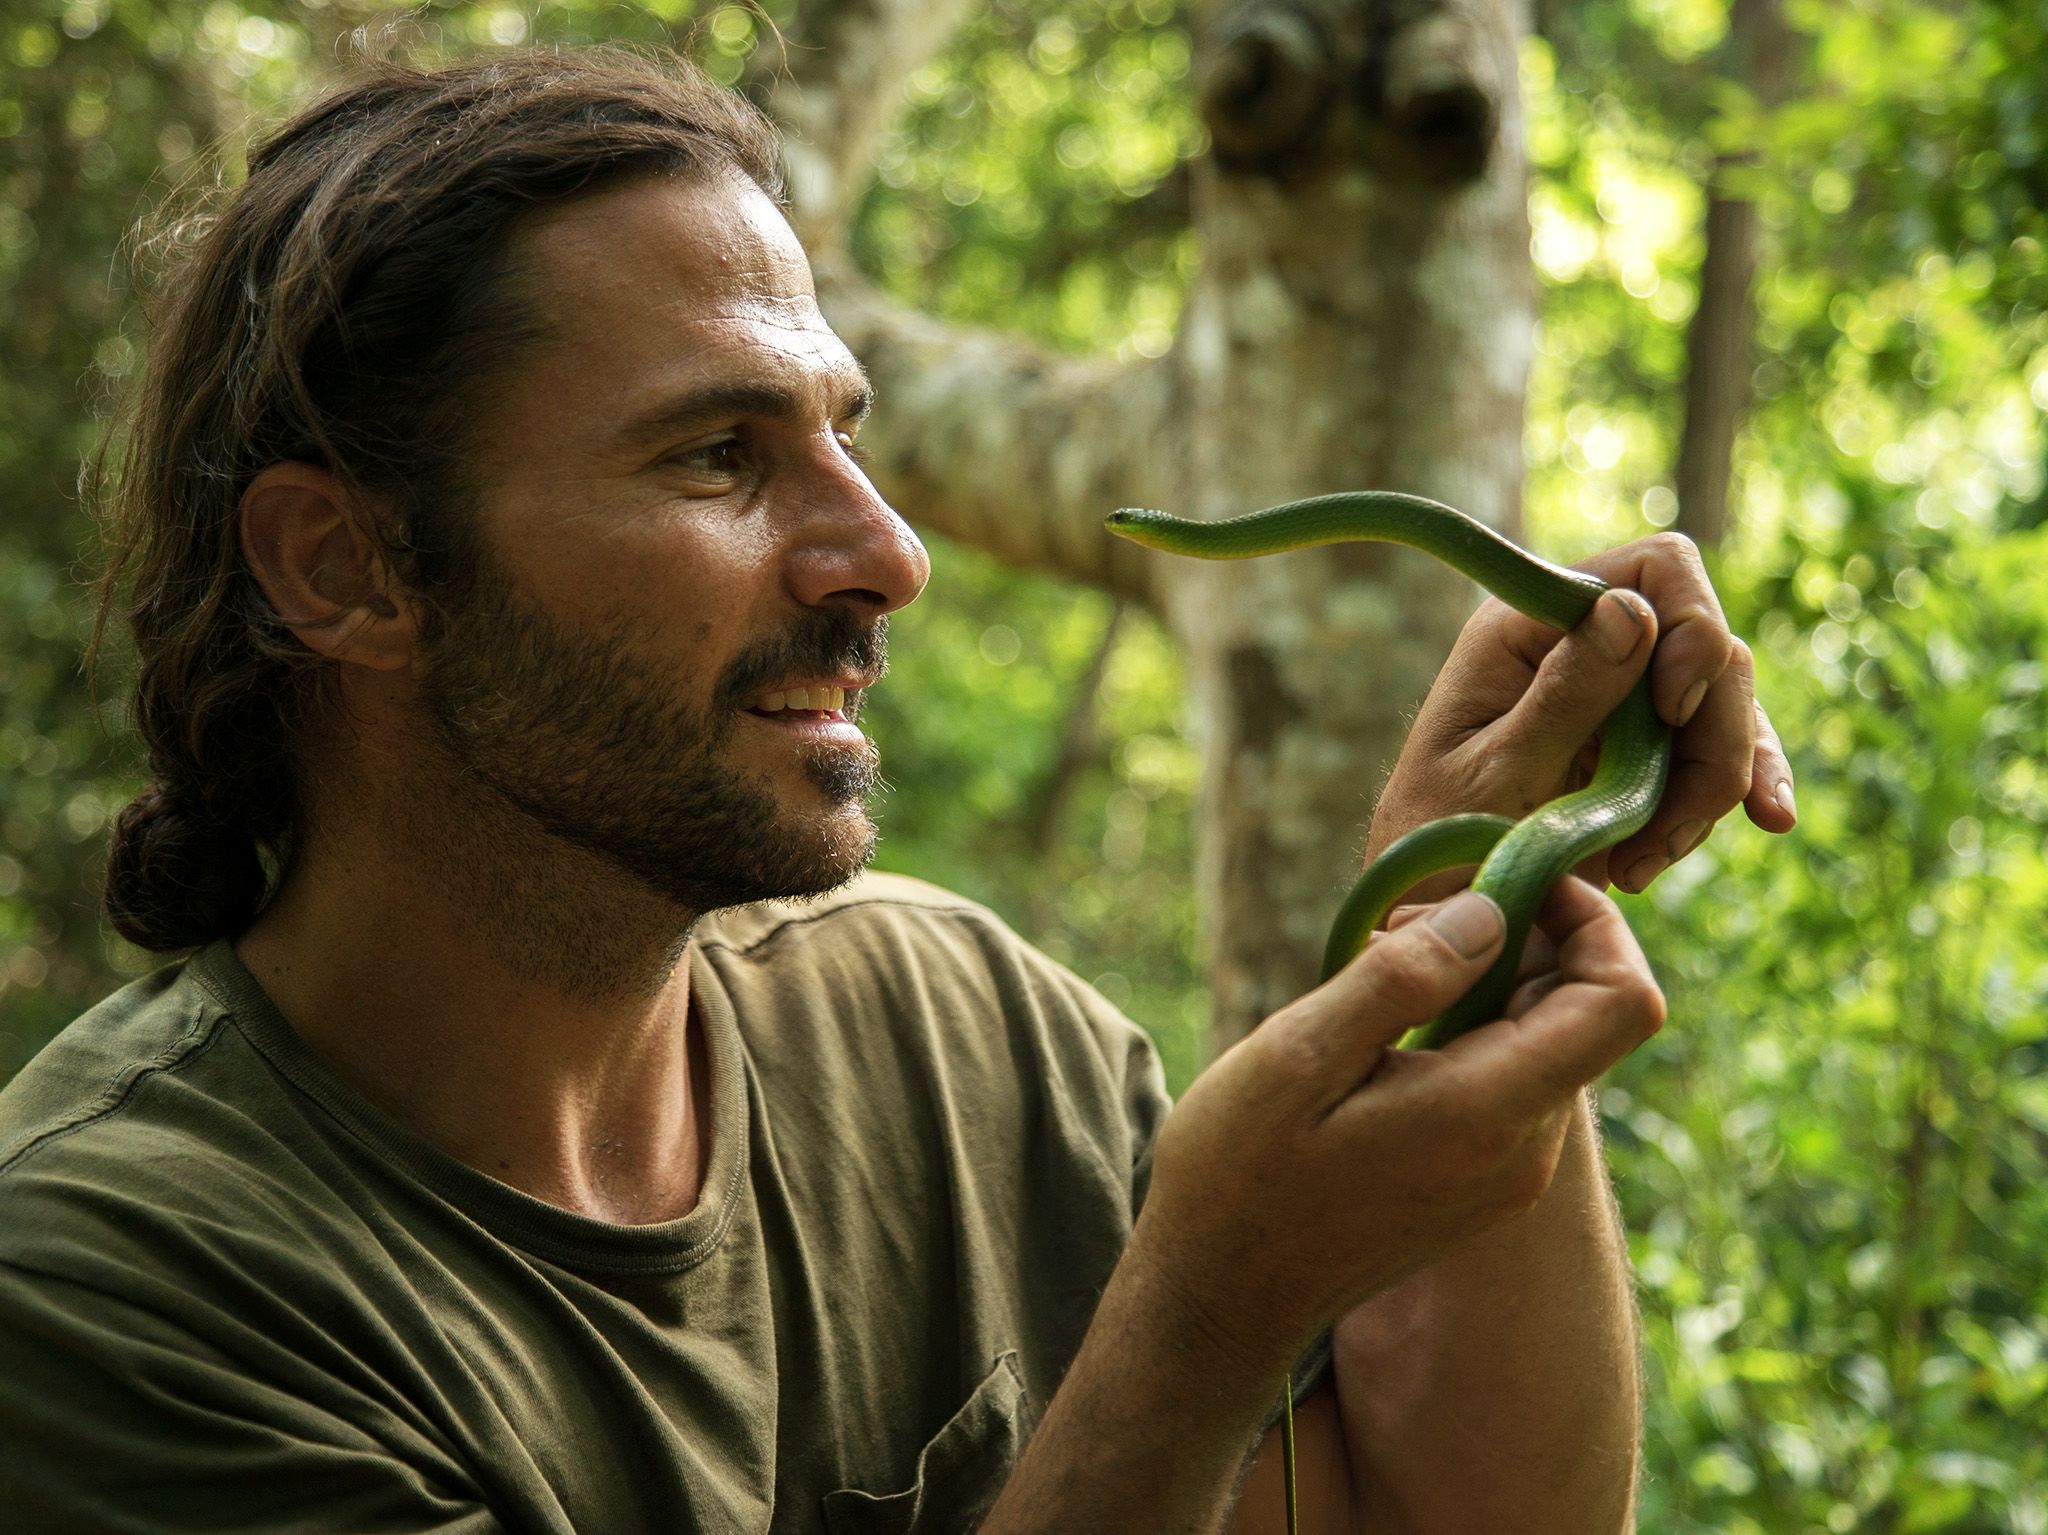 Biasha, China:  Hazen holding a snake.  This image is from Primal Survivor China. [Photo of the day - January 2019]